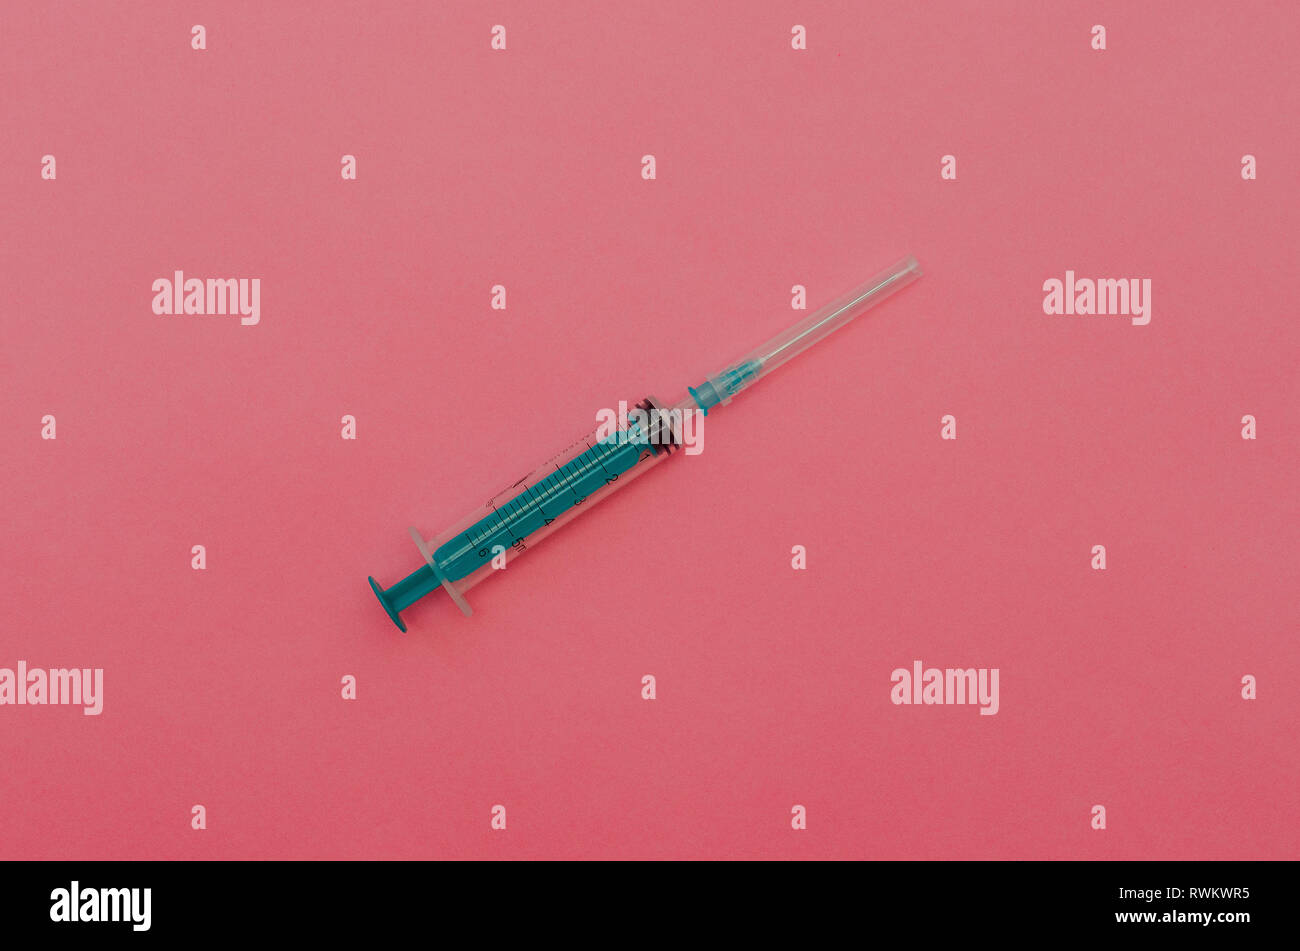 Syringe with green piston on a pink background. The concept of health Stock Photo